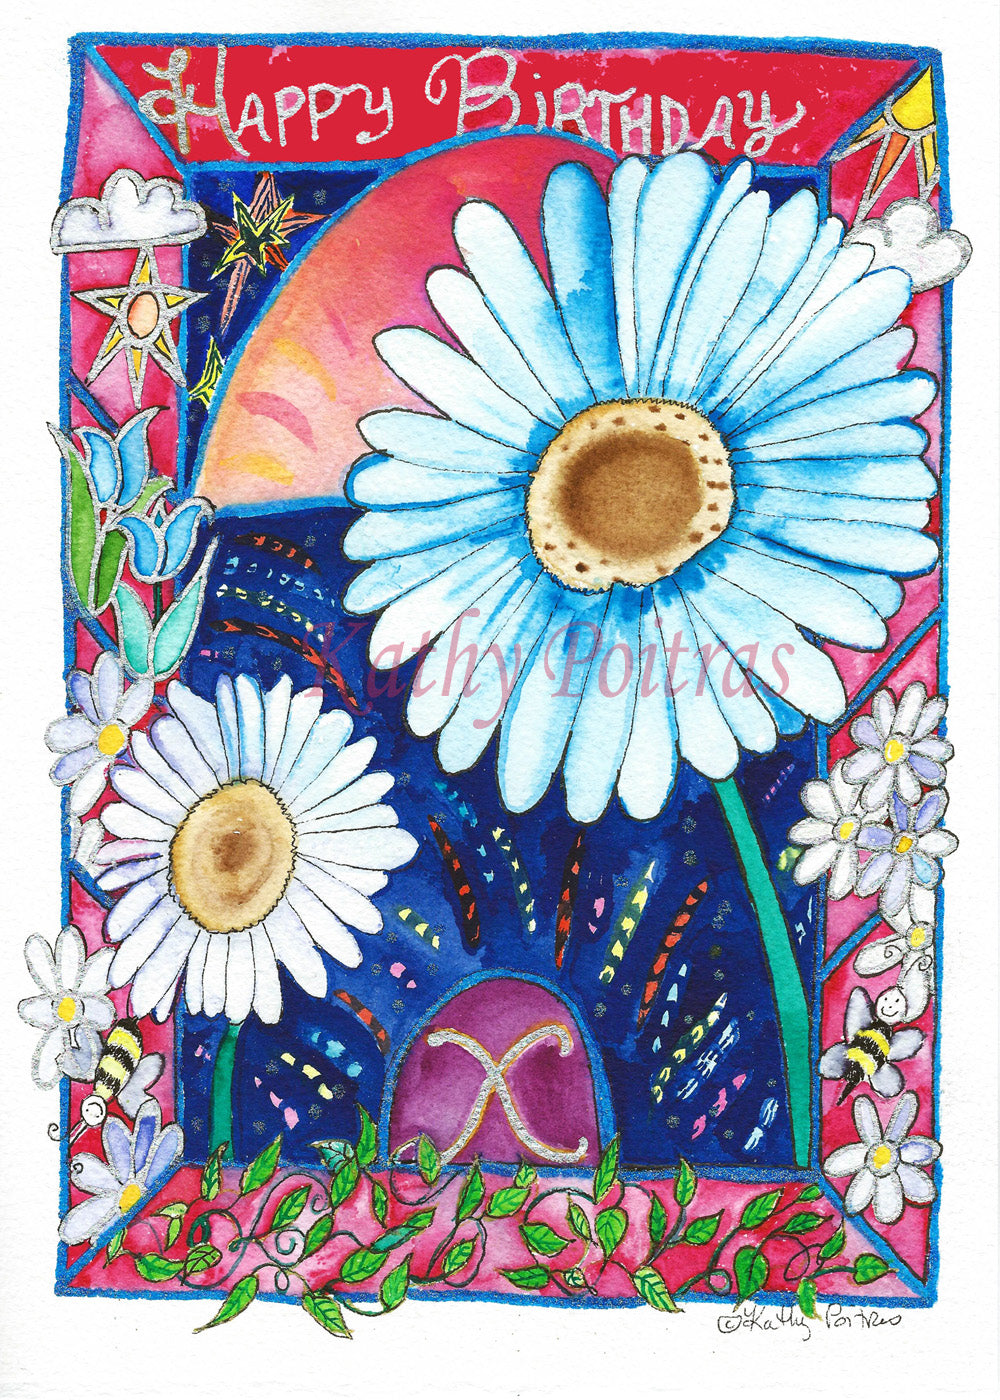 Personalized flower of the month April, Happy Birthday Card. Daisies and the letter X.   A cheerful whimsical cathedral with celebratory fireworks featuring the letter X, and daisies.  Surrounded by a border with naïve images expressing life. Happy Birthday is written on the top. 